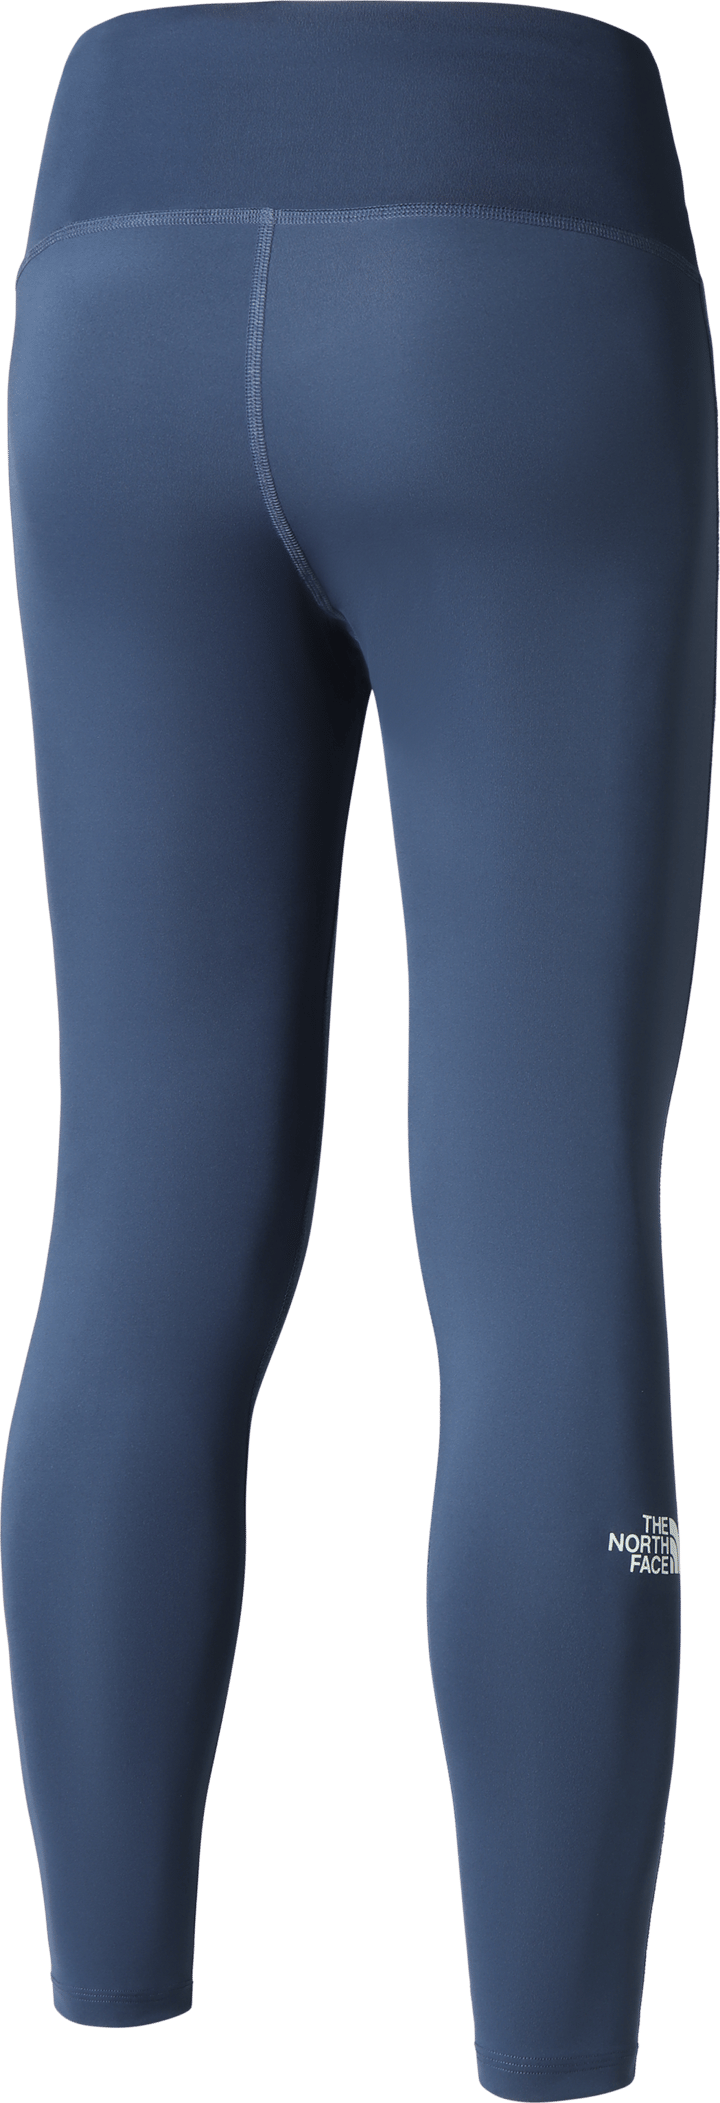 Women's Flex High Rise 7/8 Tights SHADY BLUE The North Face